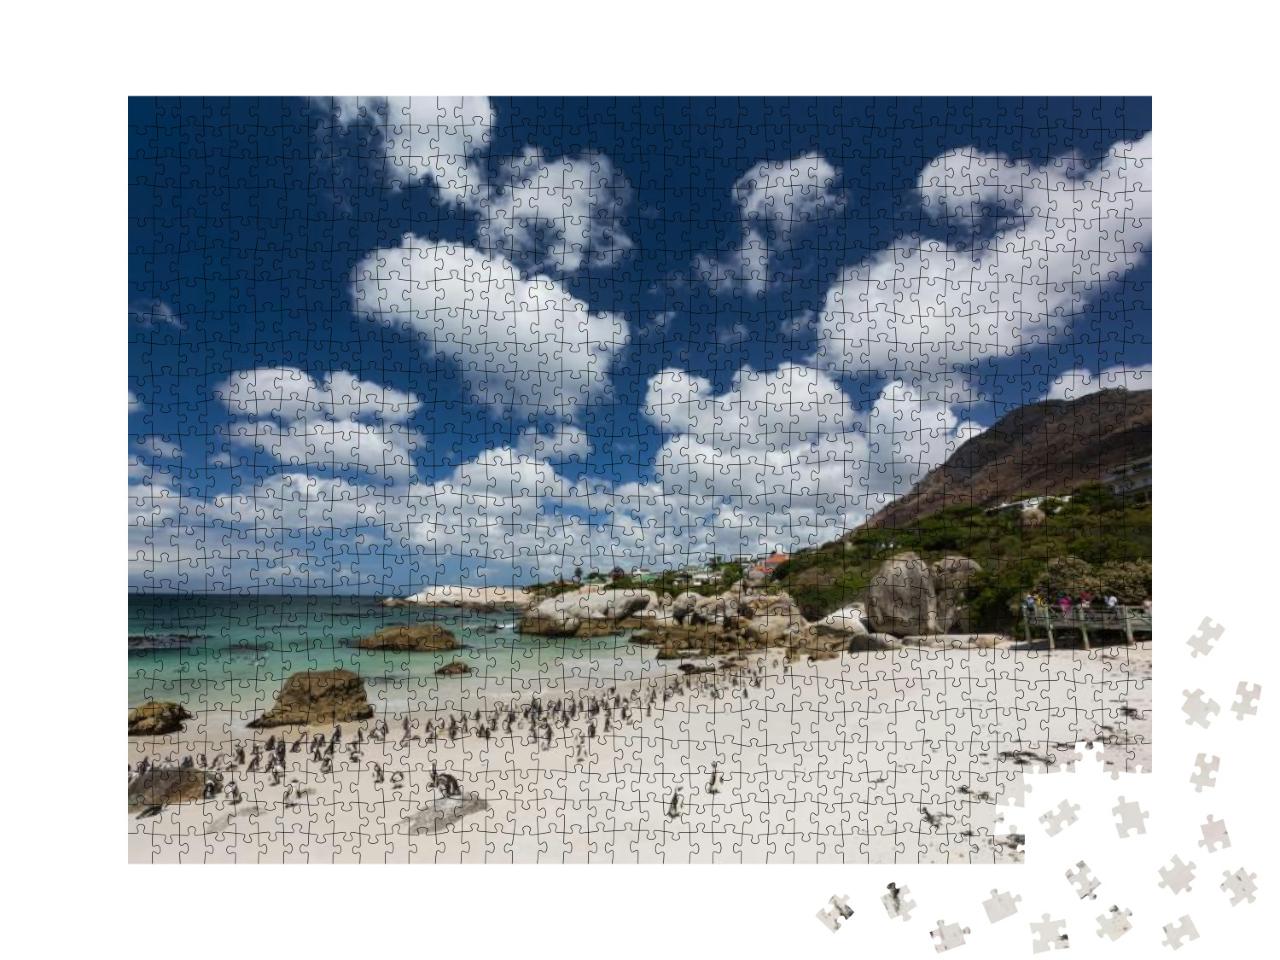 Penguins Walk on the Beach. Boulders Beach, Cape Town, So... Jigsaw Puzzle with 1000 pieces